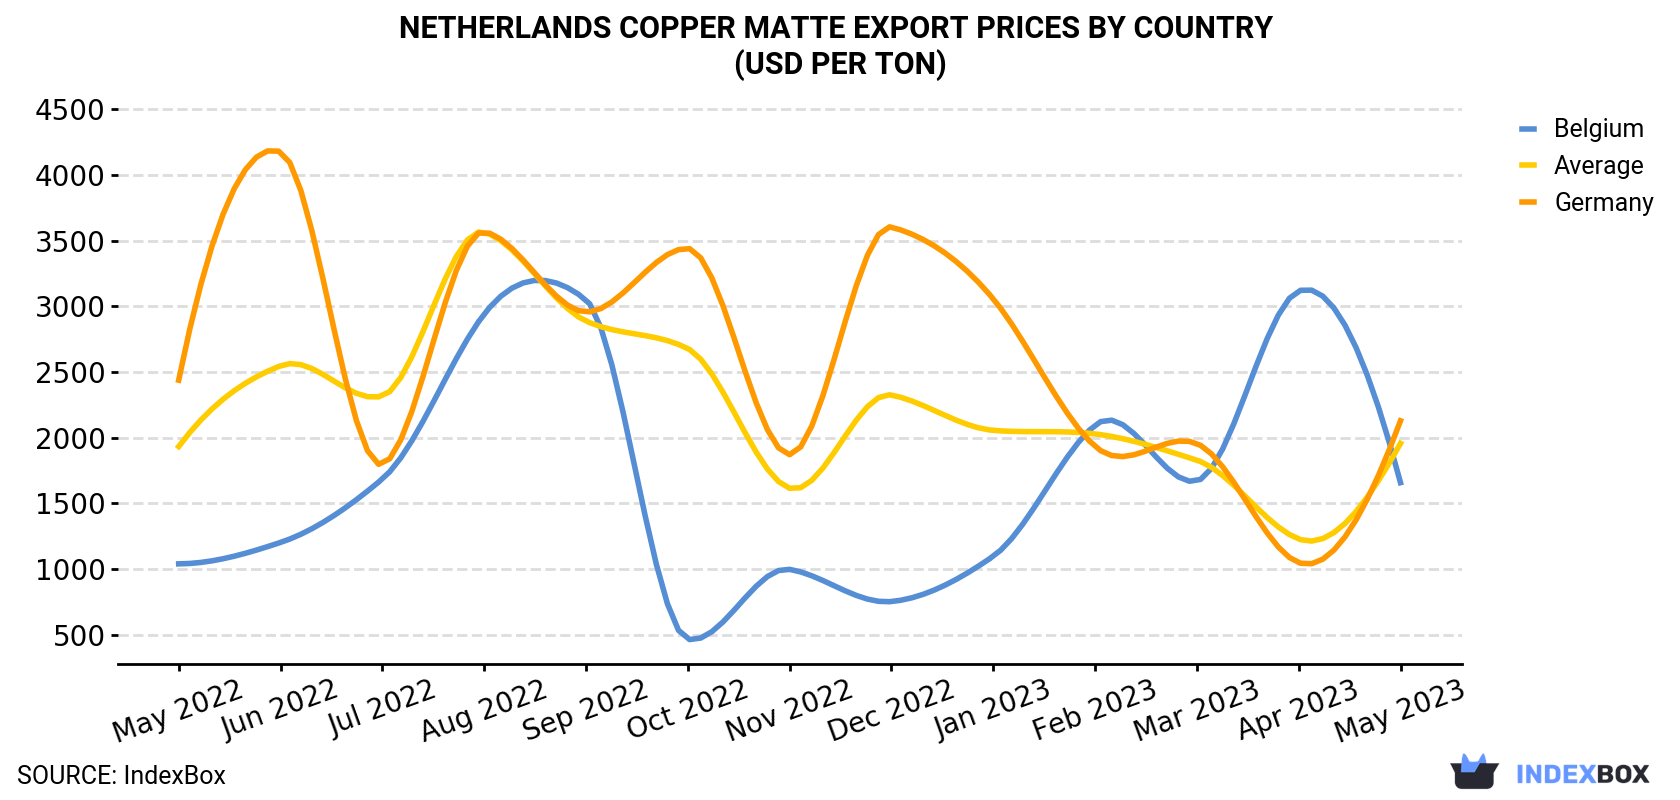 Netherlands Copper Matte Export Prices By Country (USD Per Ton)